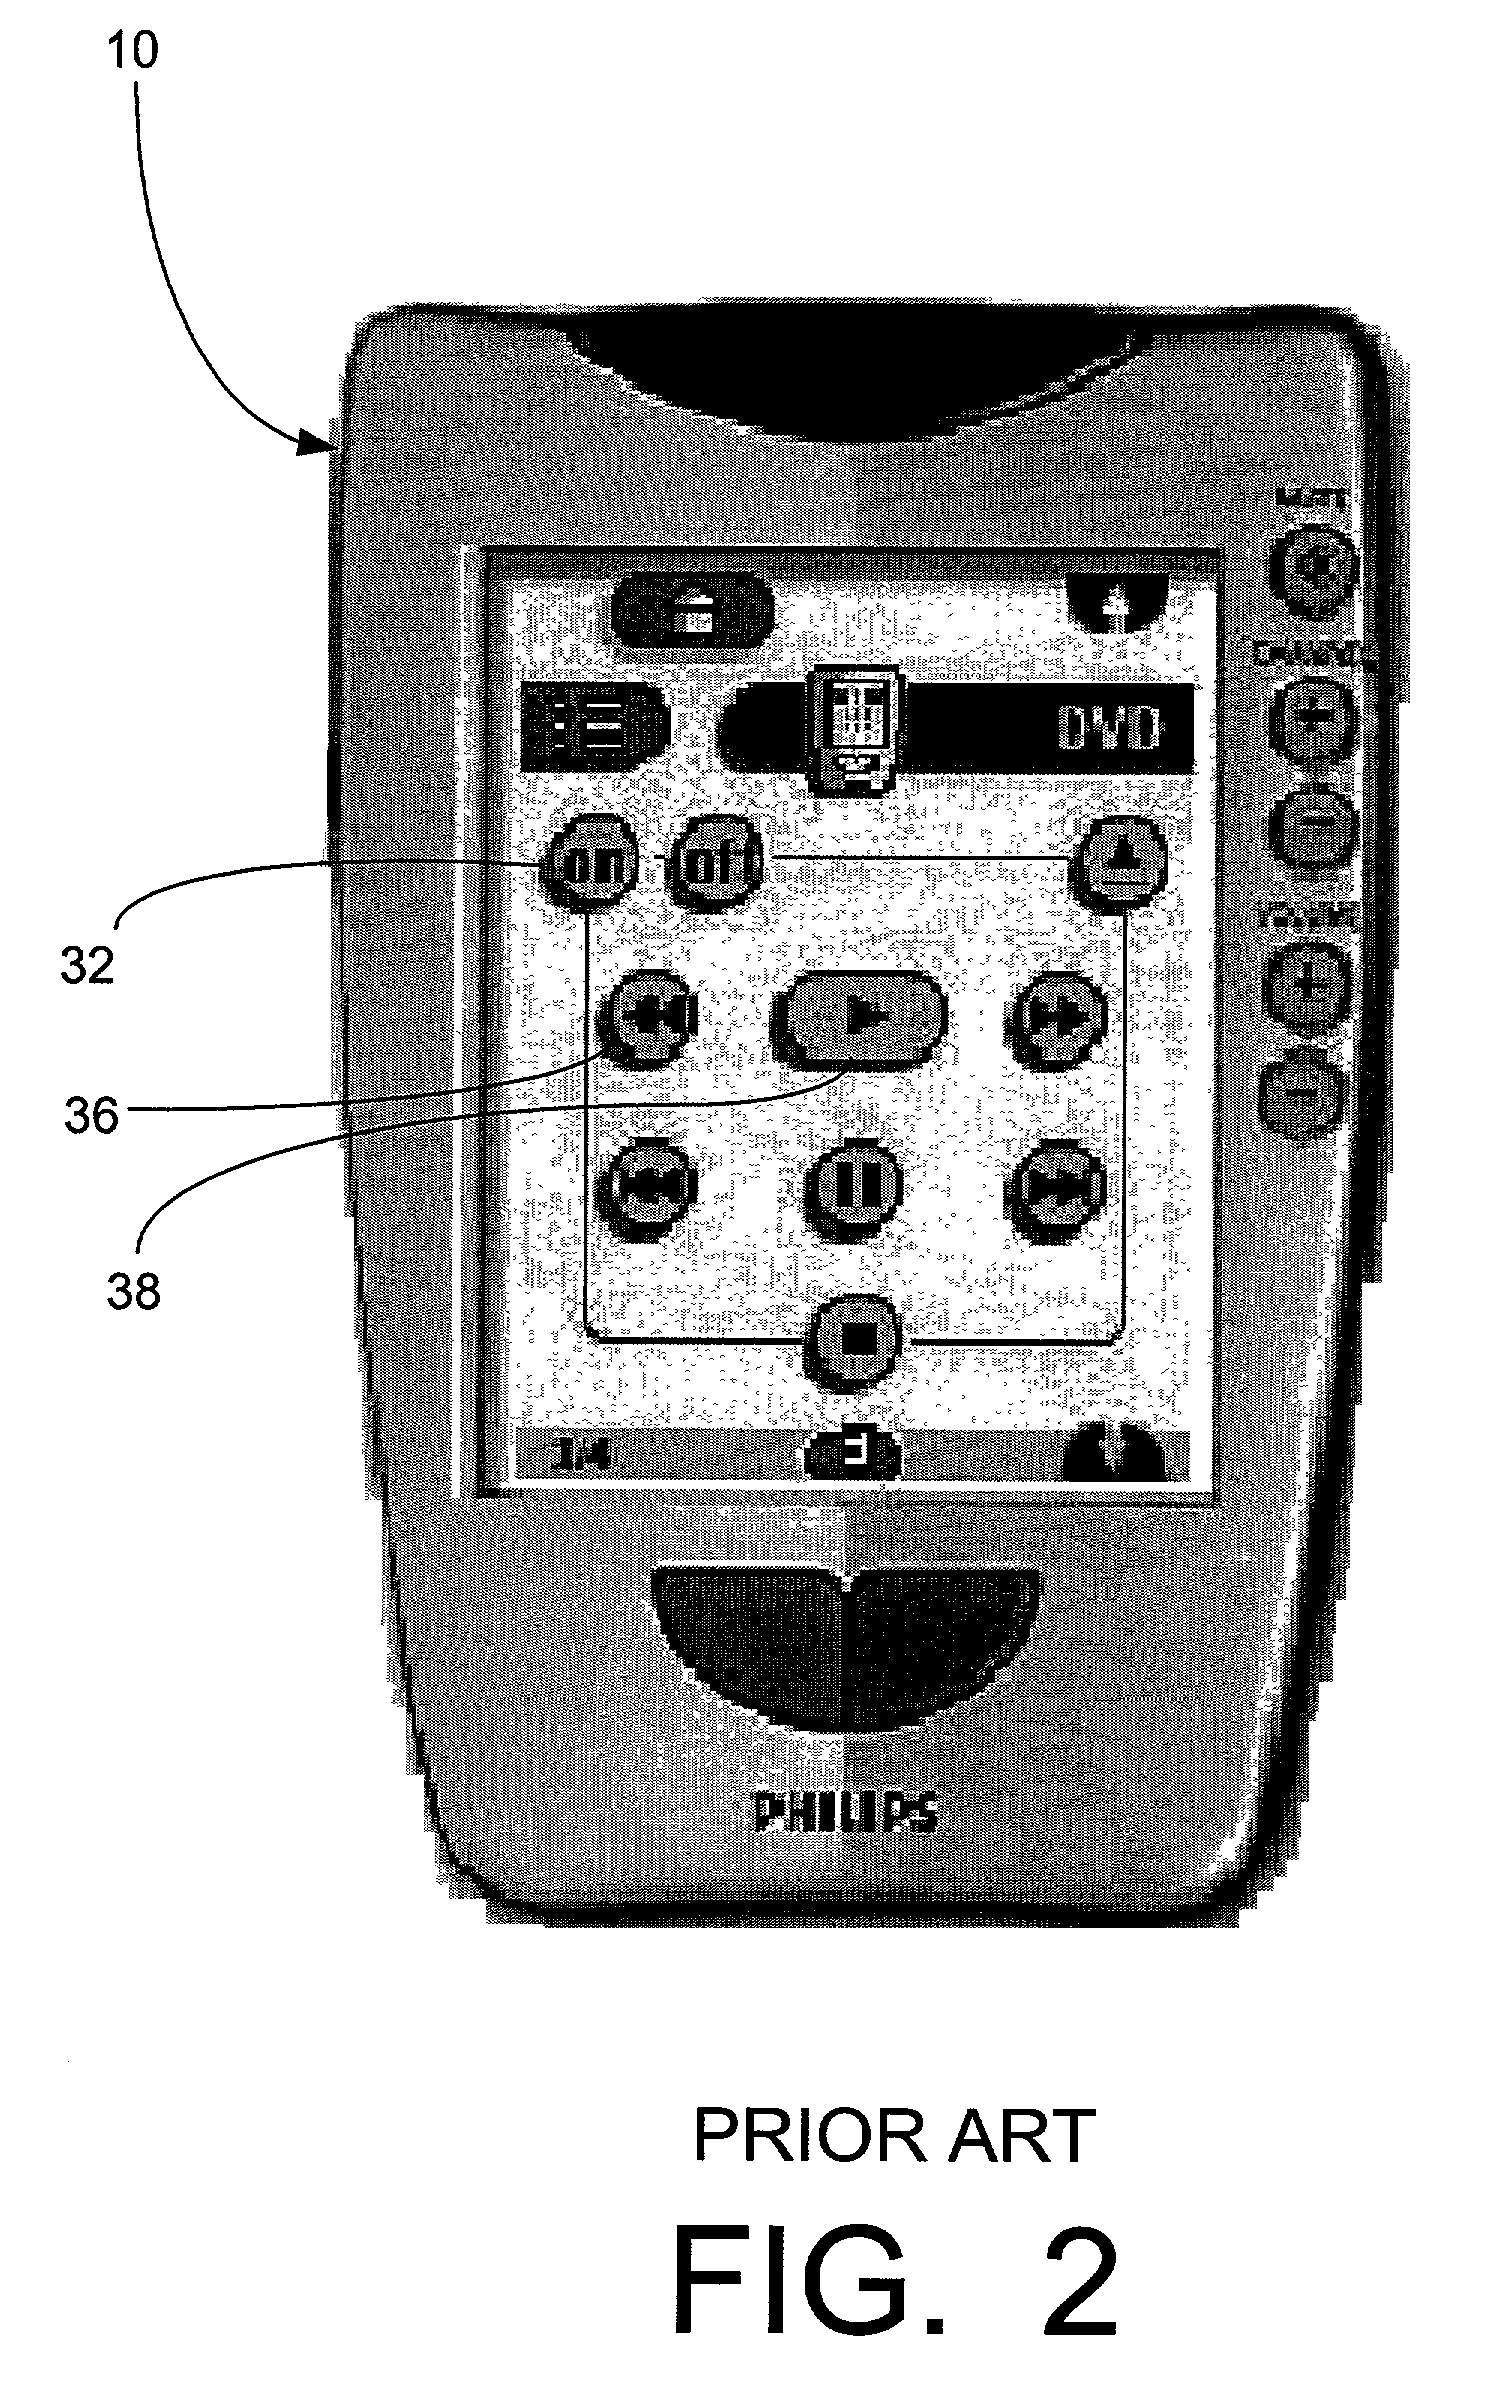 Graphic user interface having touch detectability